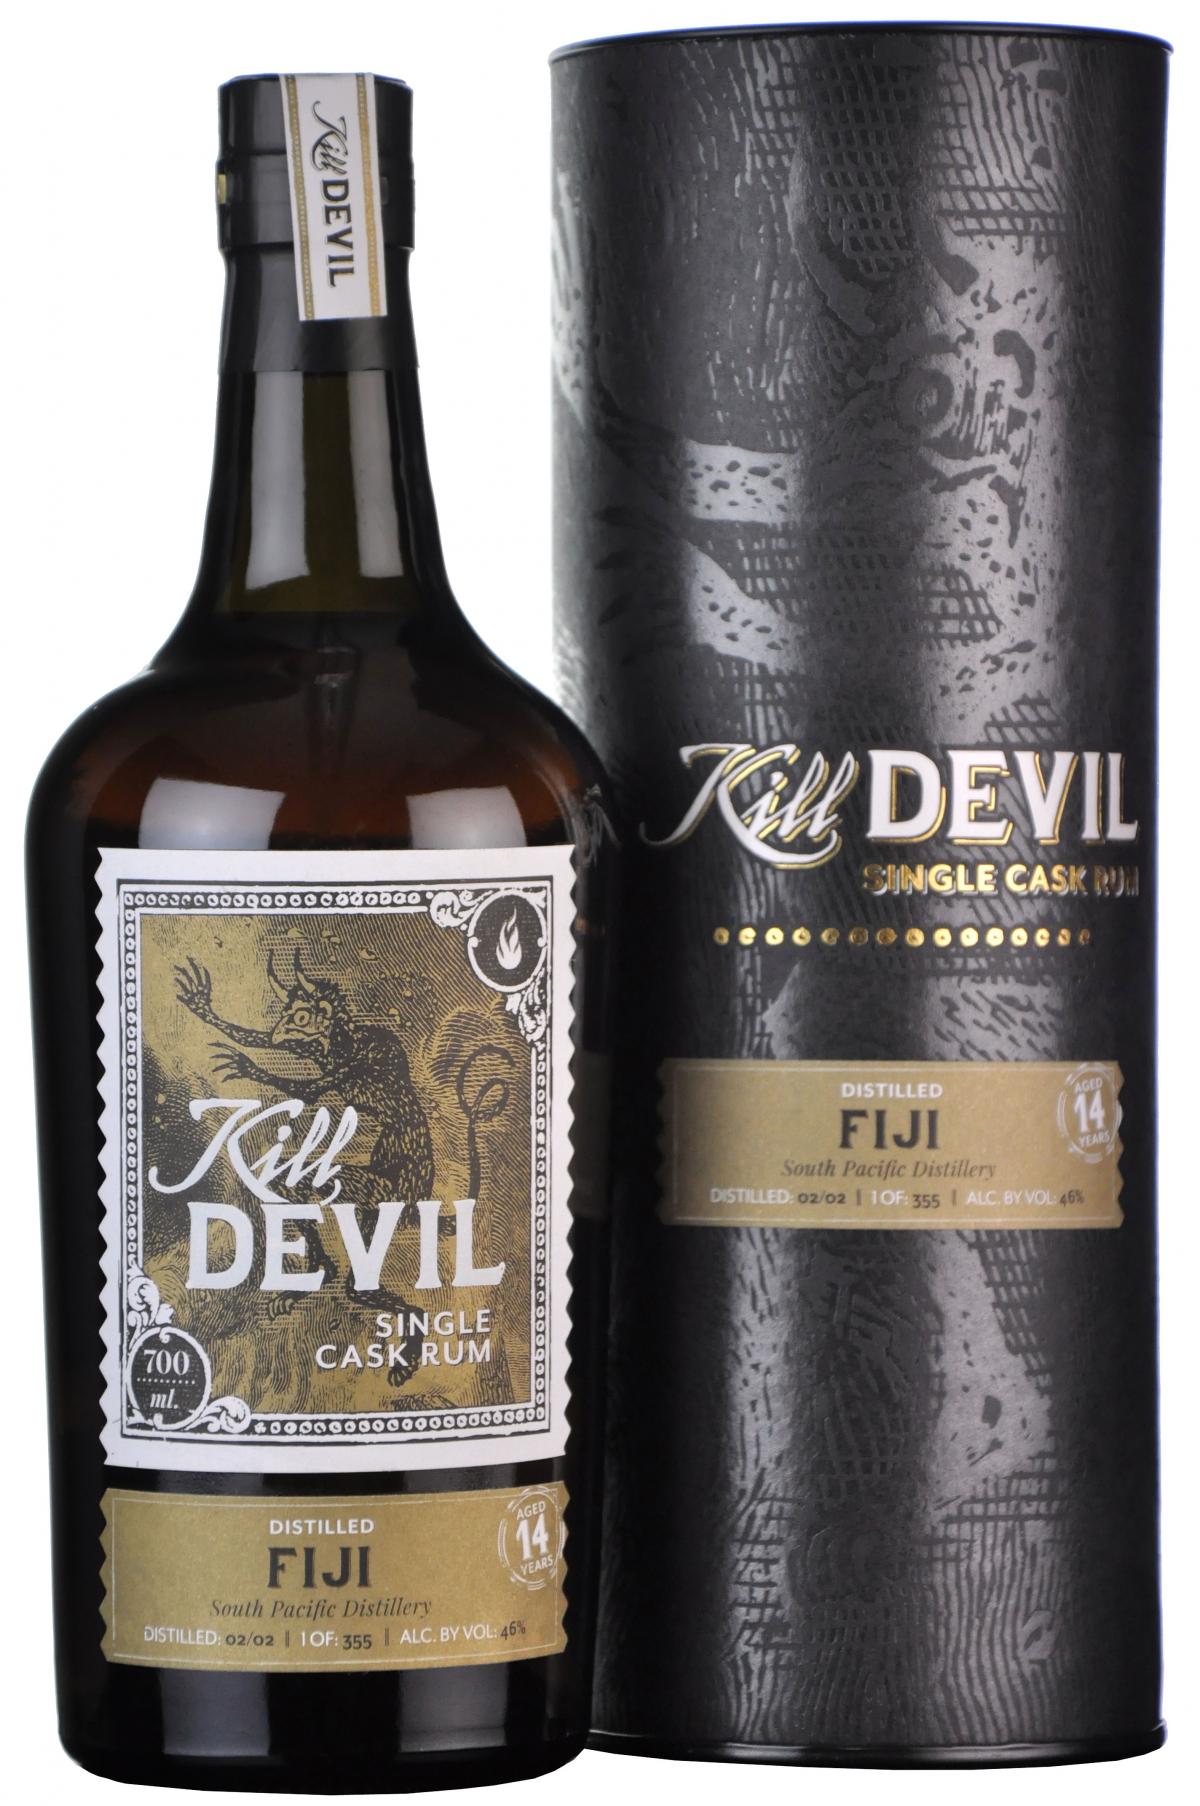 South Pacific 14 Year Old | Kill Devil Single Cask Rum